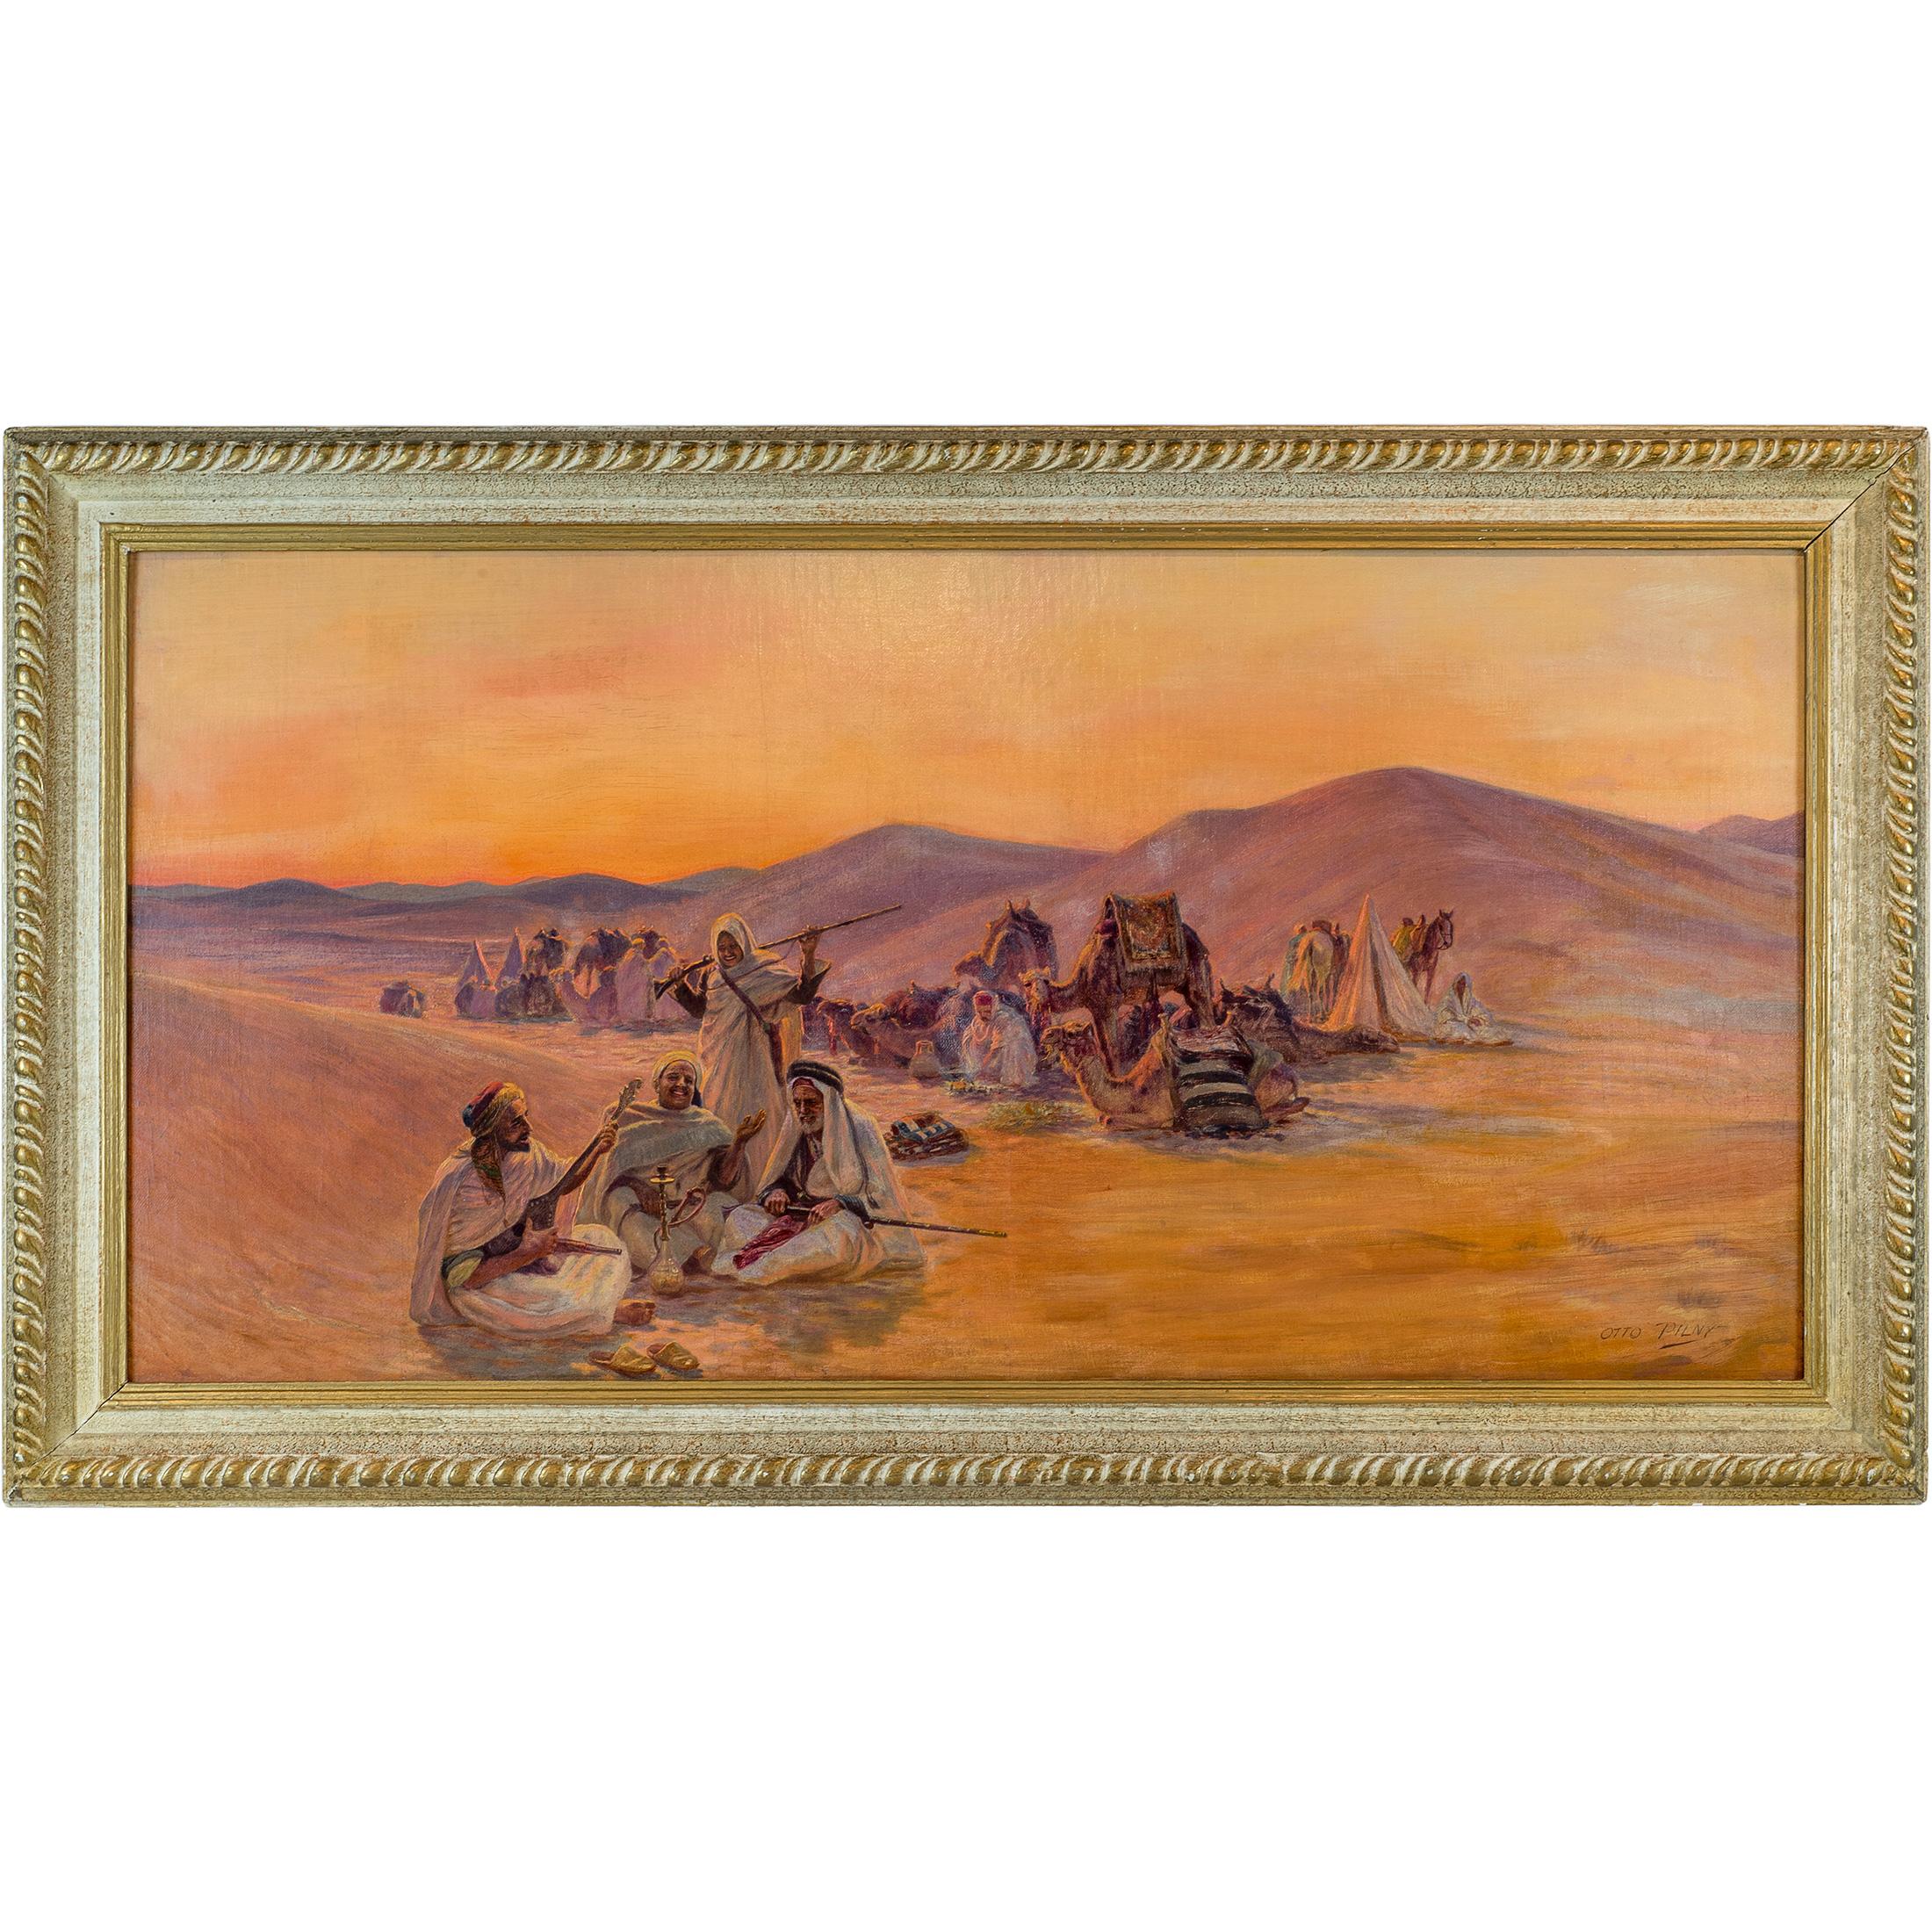 Bedouin Camp - Painting by Otto Pliny